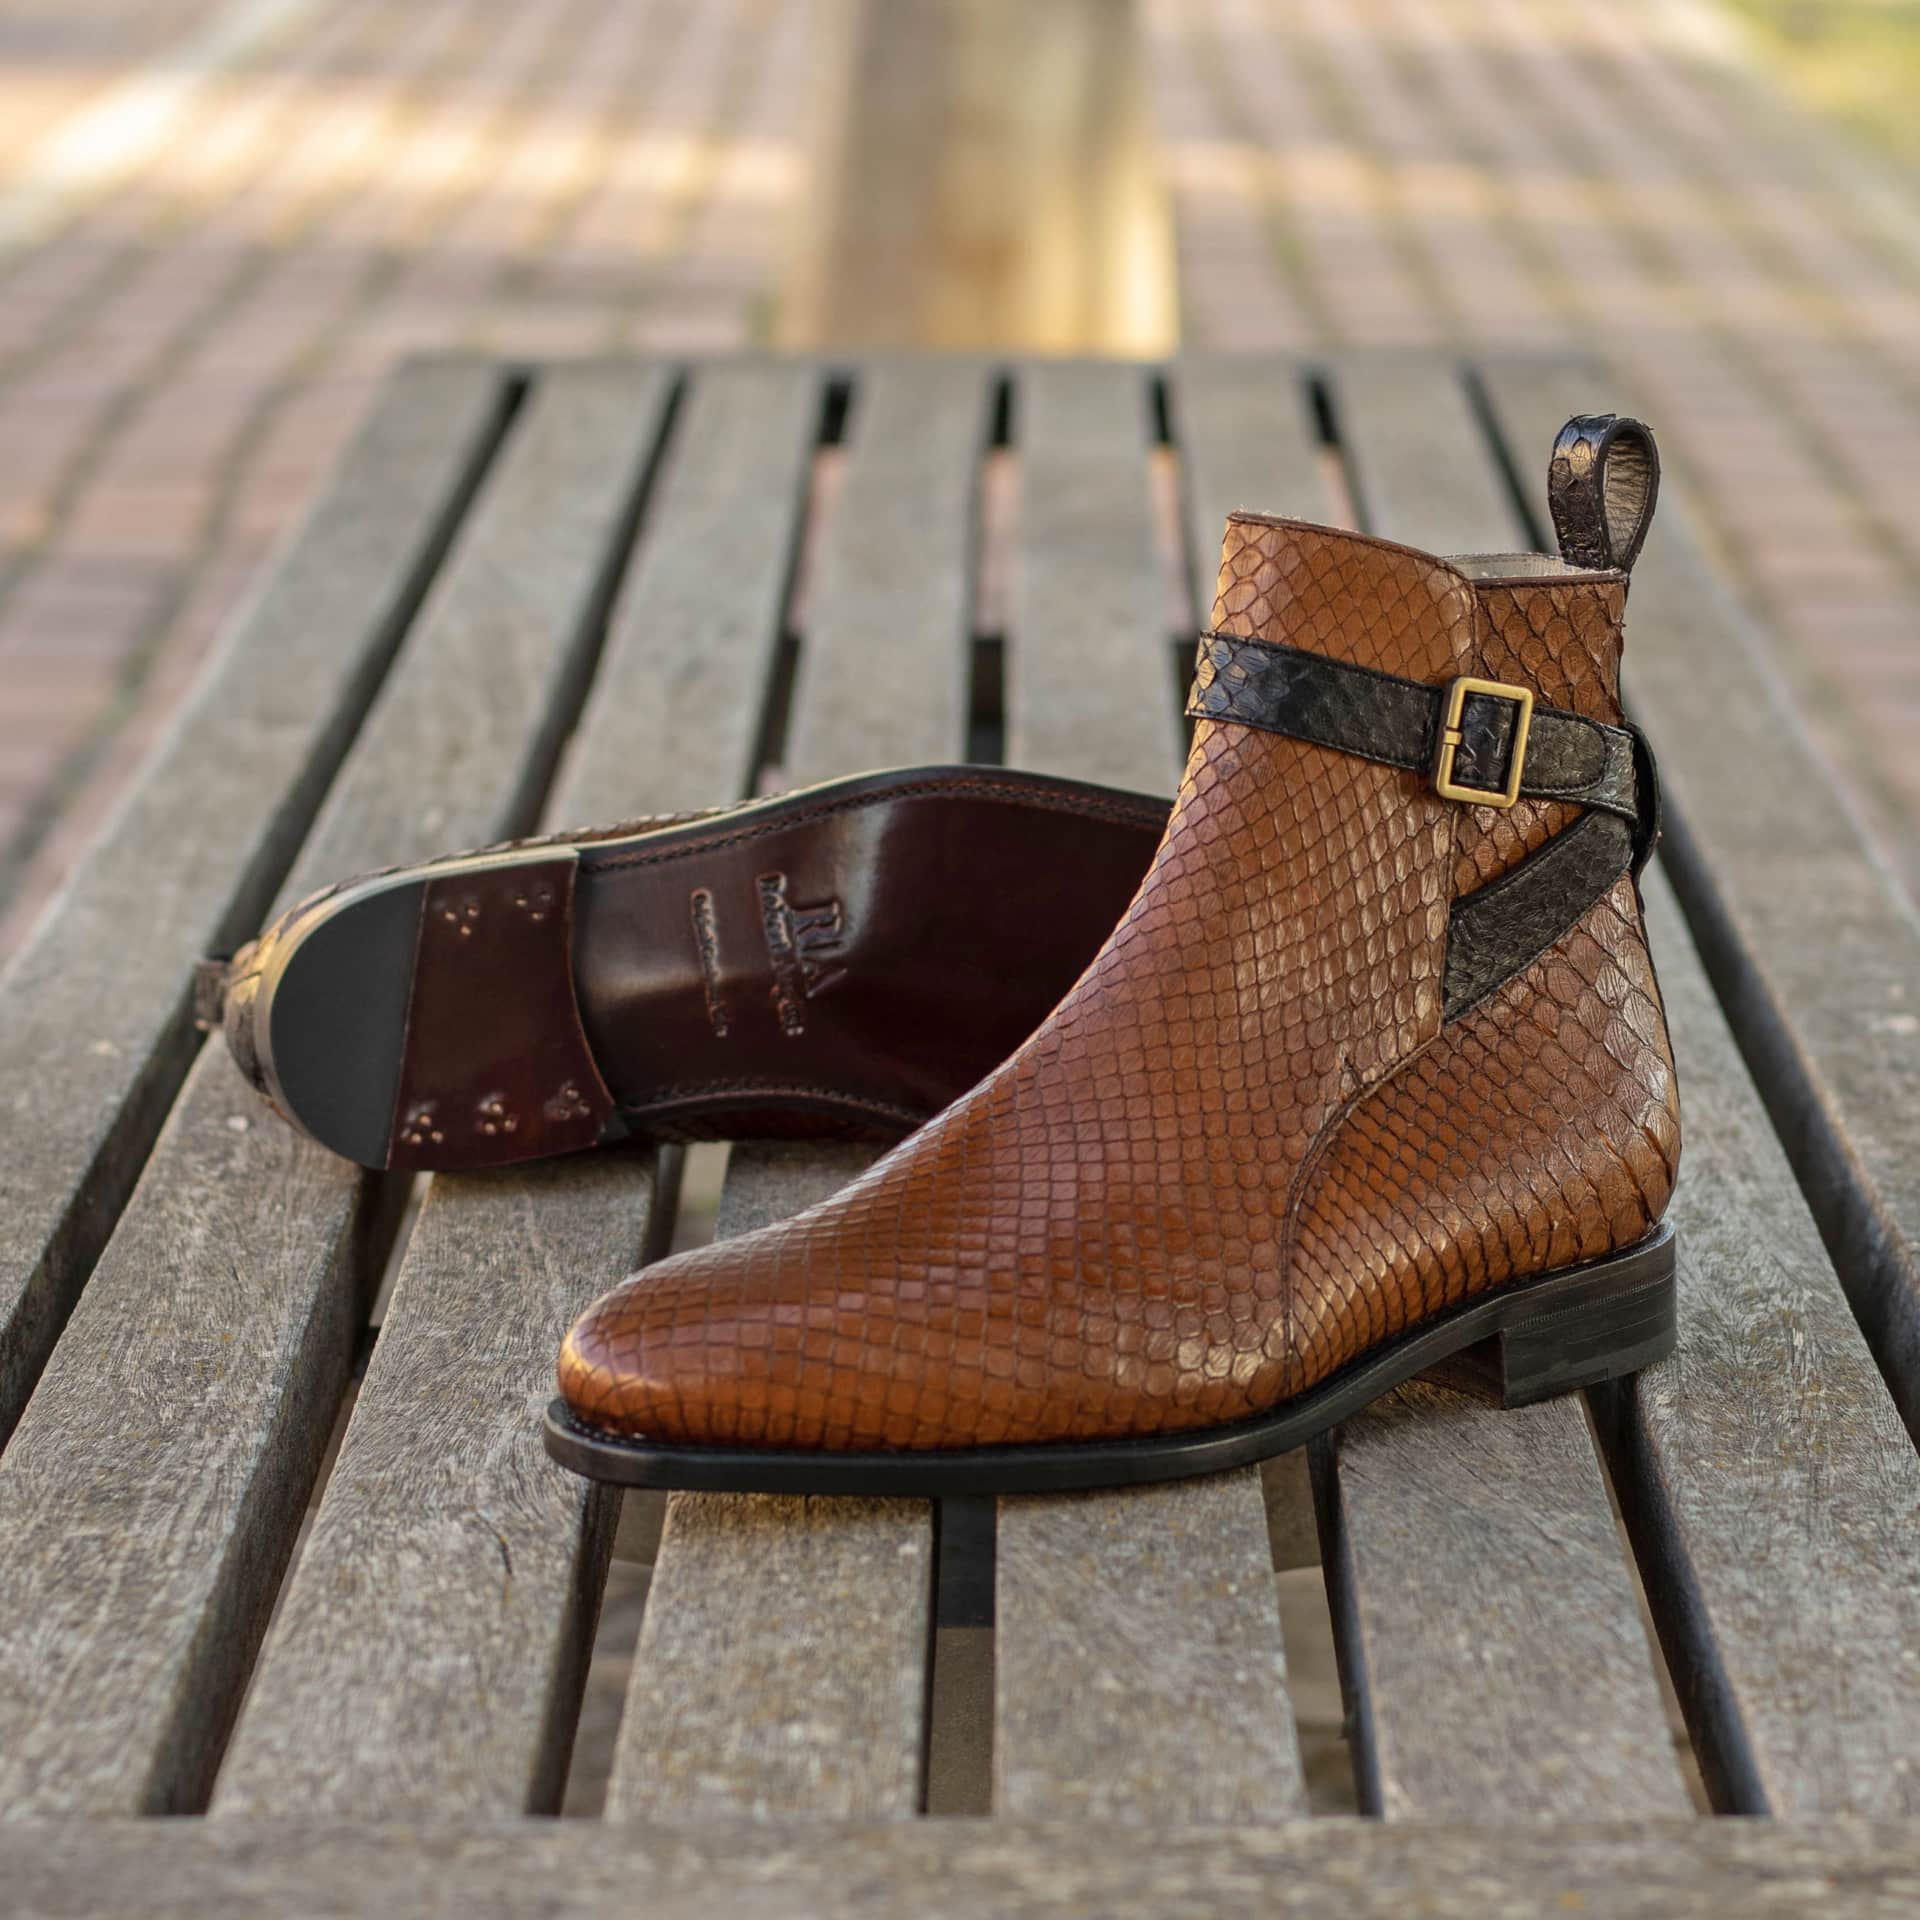 Introducing The Rush St. Jodphur Boot from Robert August: Custom-Made Luxury Footwear Handcrafted in Spain